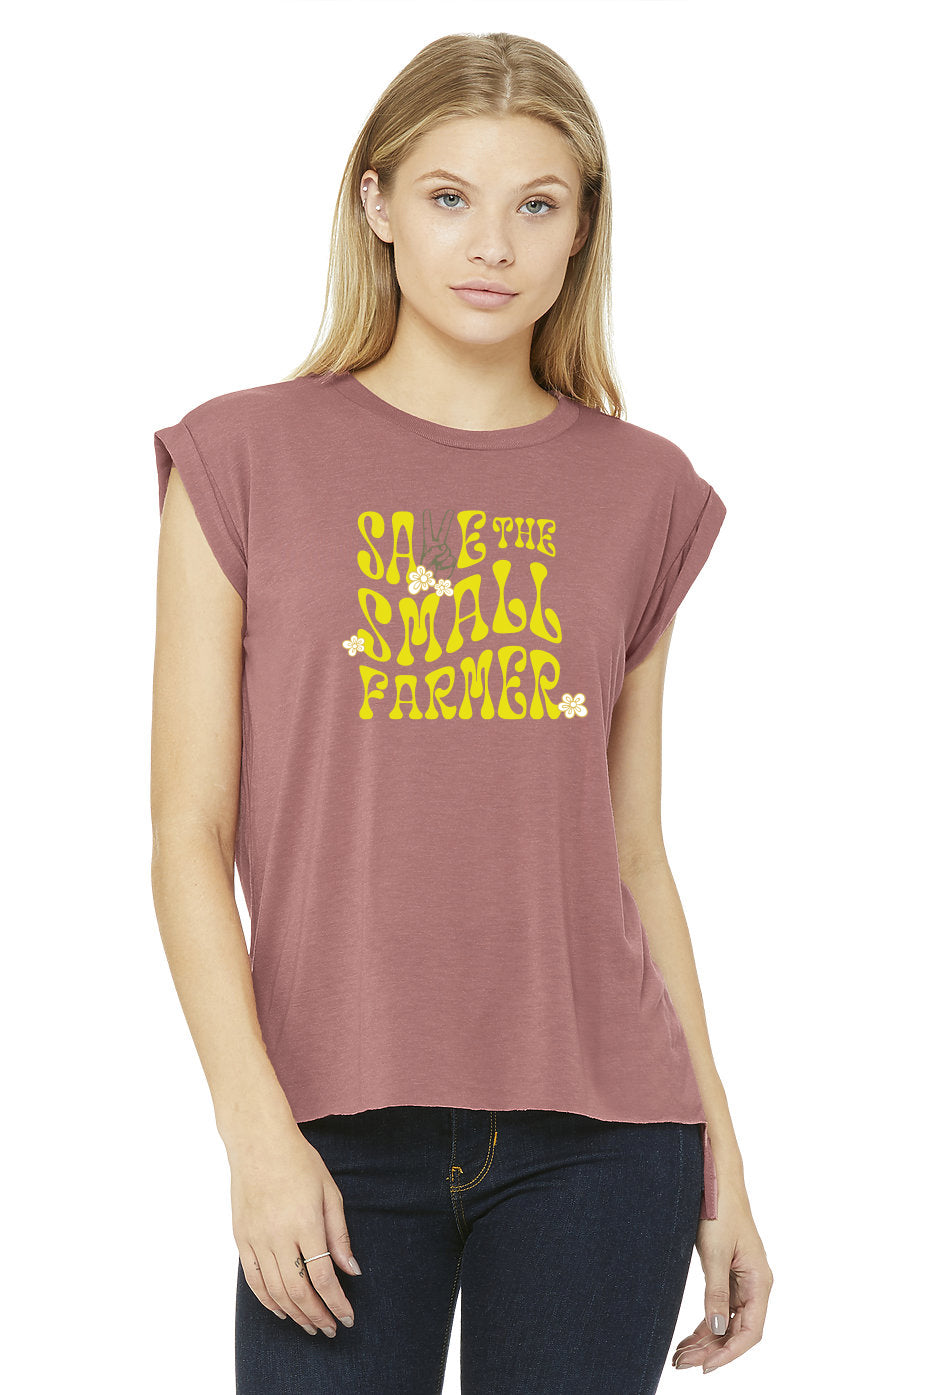 WWF "Save the small farmer" | Women's Flowy Muscle Tank | Mauve